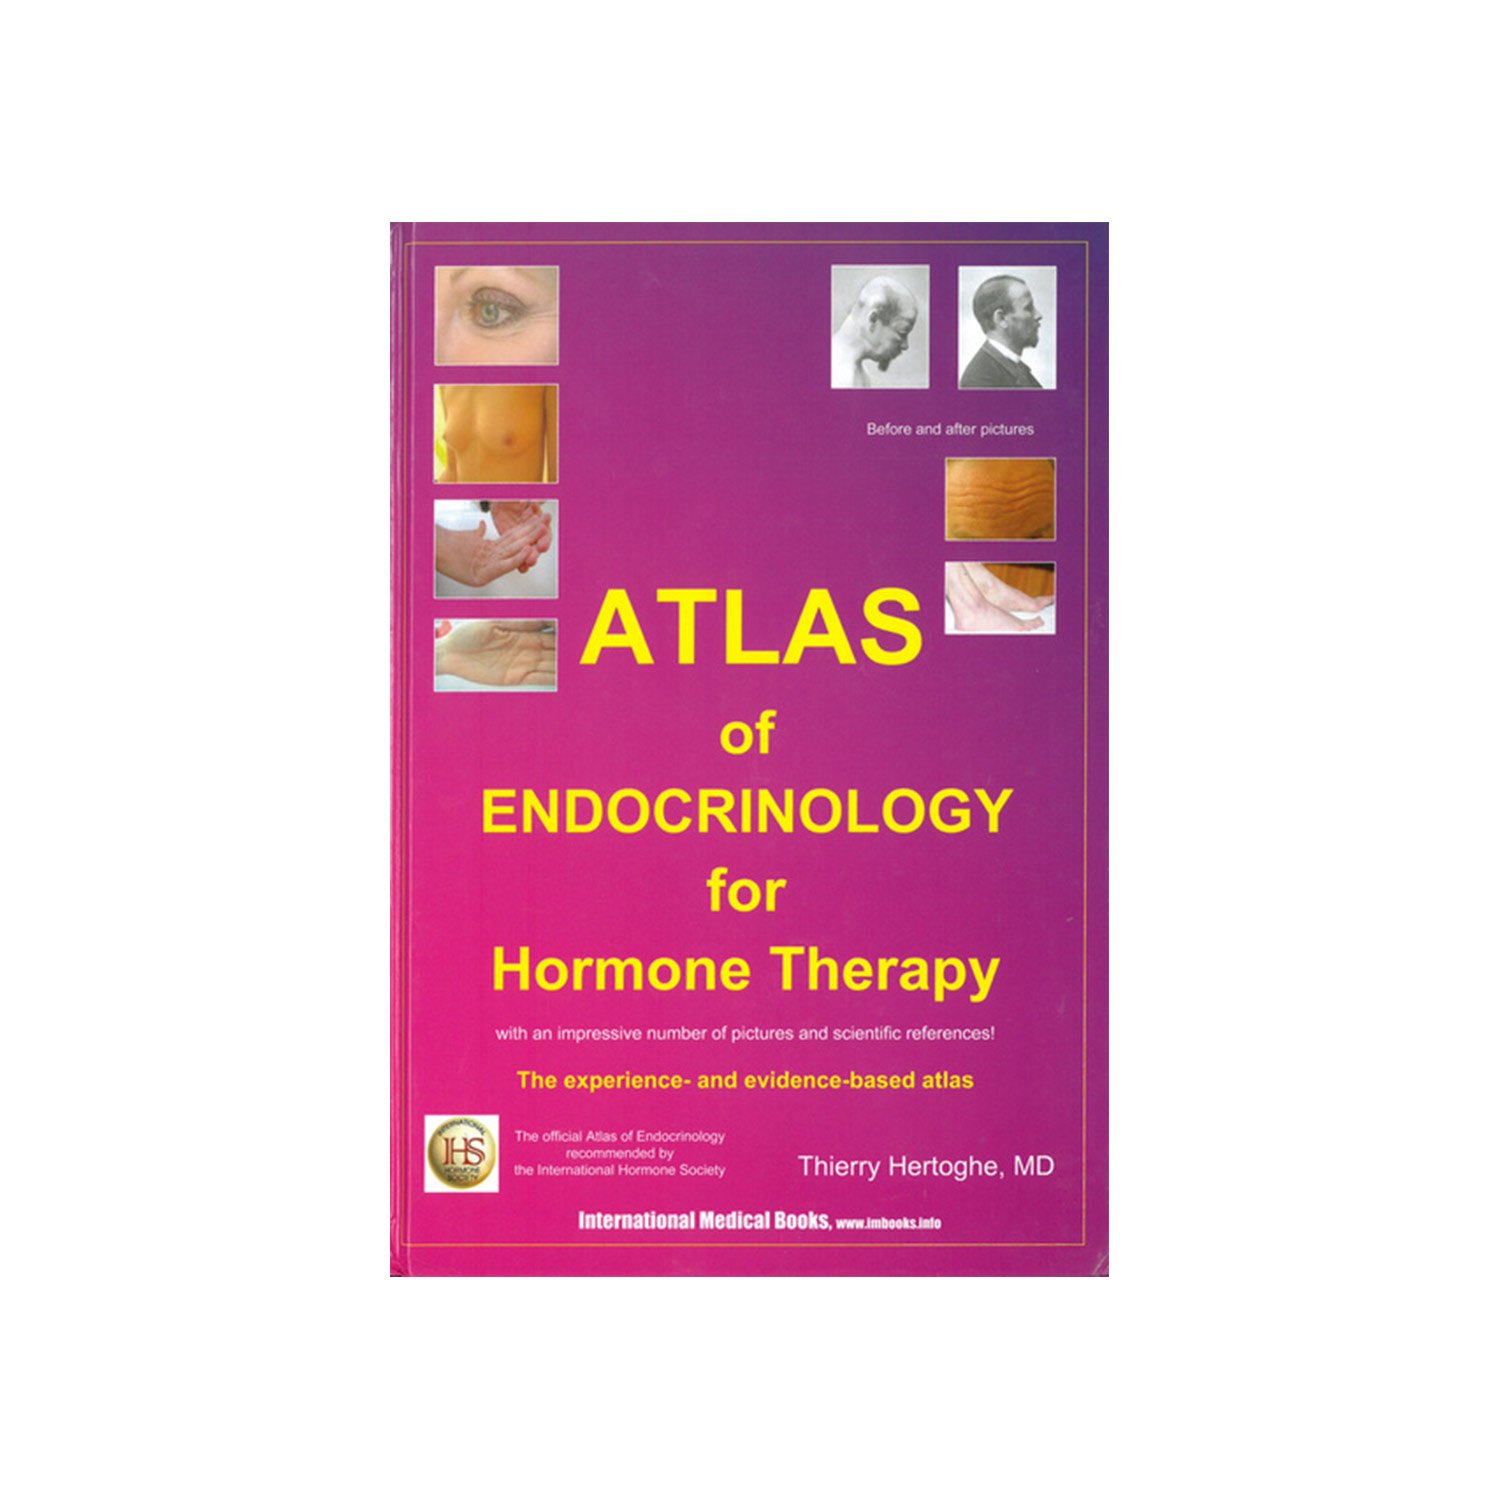 Atlas of Endocrinology for Hormone Therapy By Dr Thierry Hertoghe MD